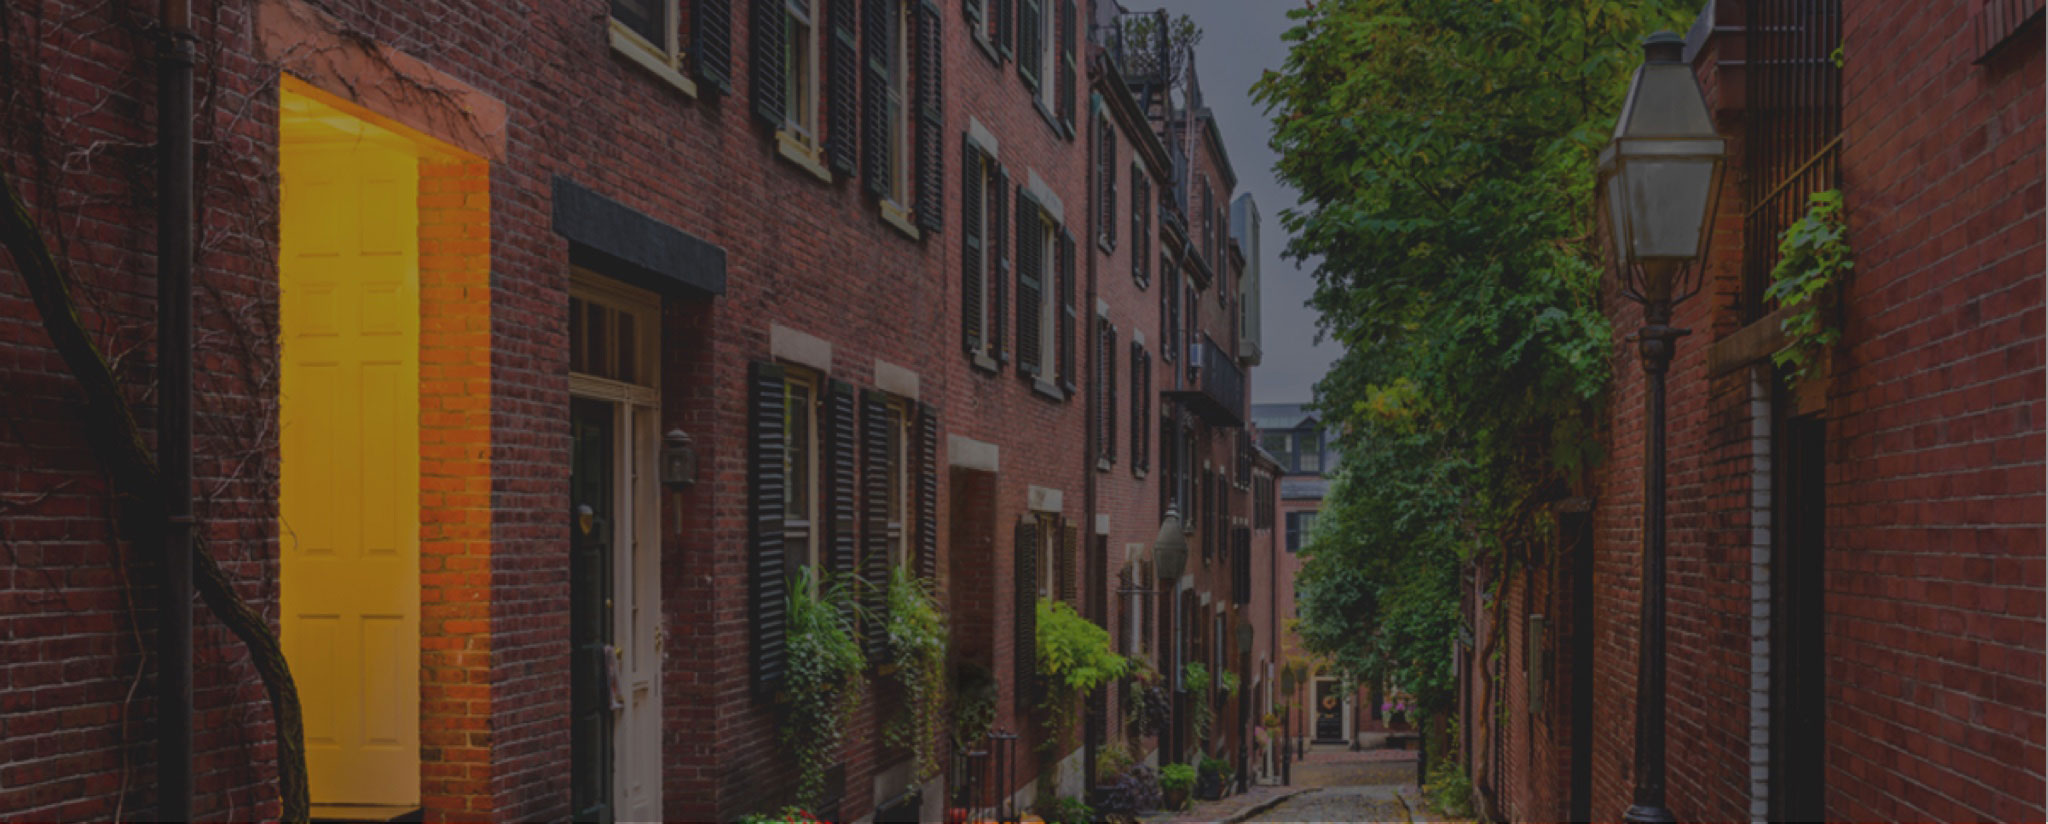 Alley of brick townhomes with greenery and smart light switch